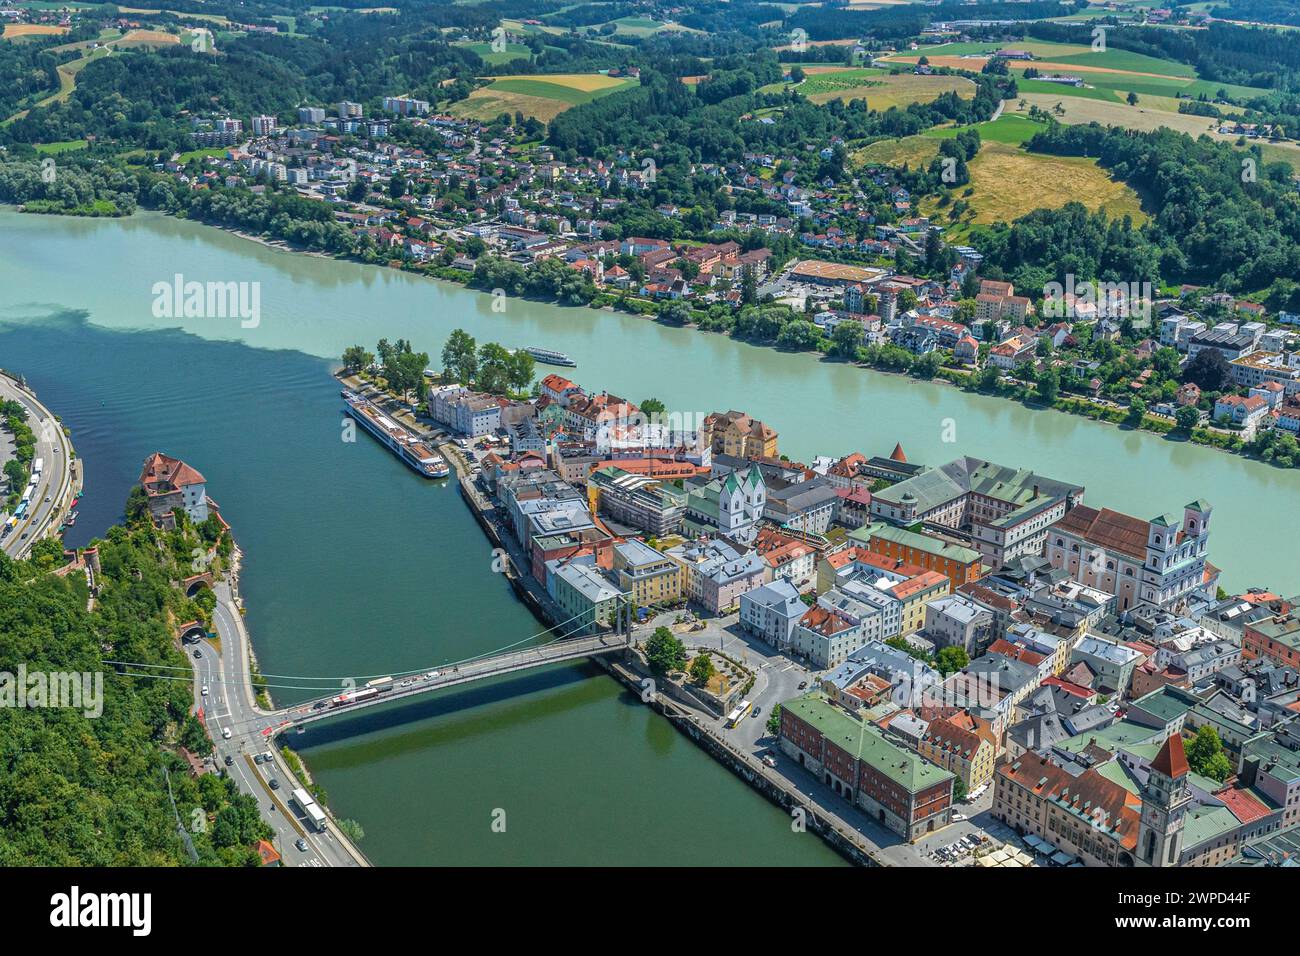 Aerial view of the three-river city of Passau at the confluence of the Danube, Inn and Ilz rivers Stock Photo